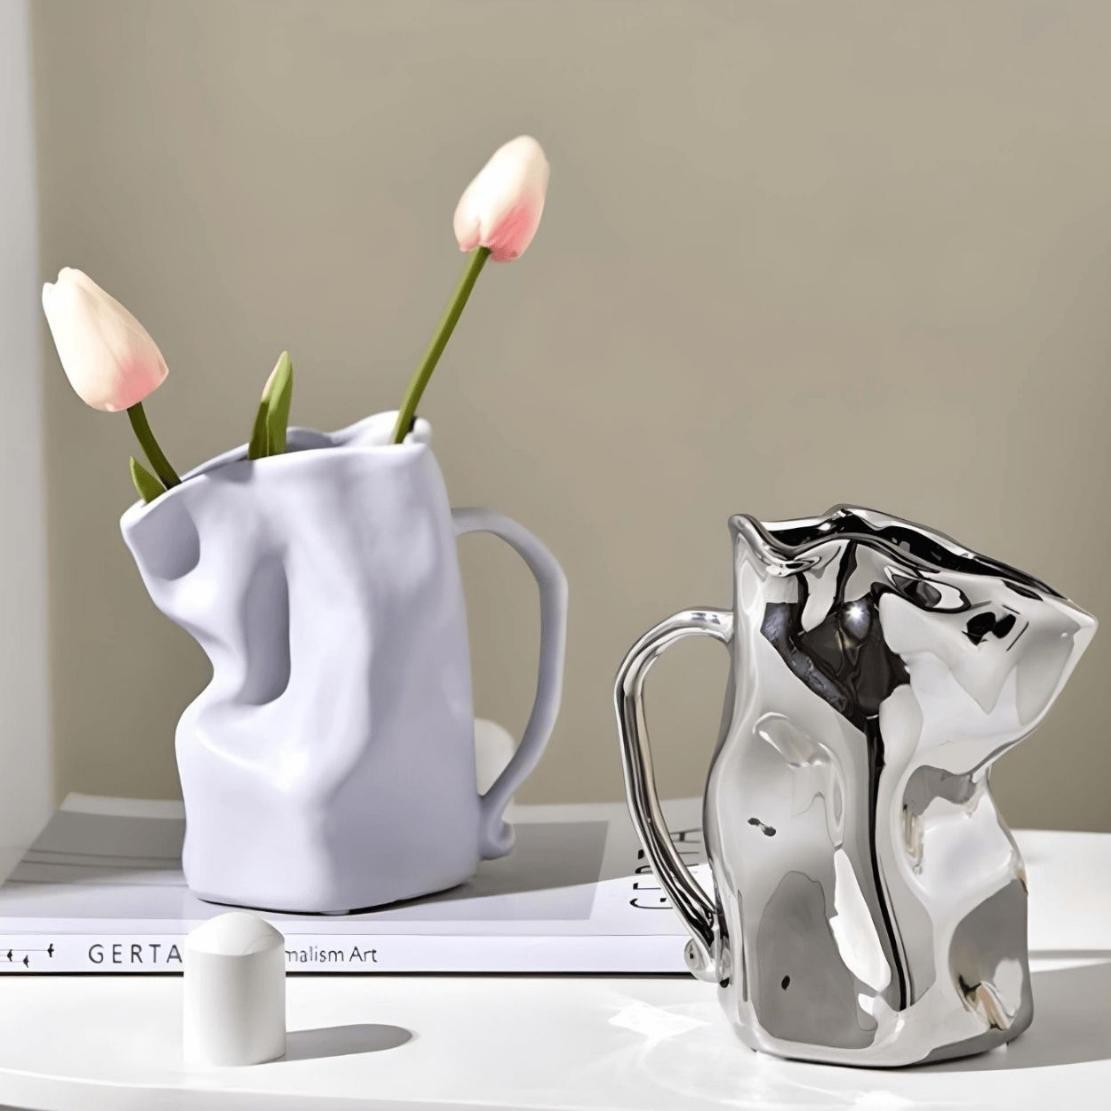 Purple and silver ceramic paper bag vases with pink tulips